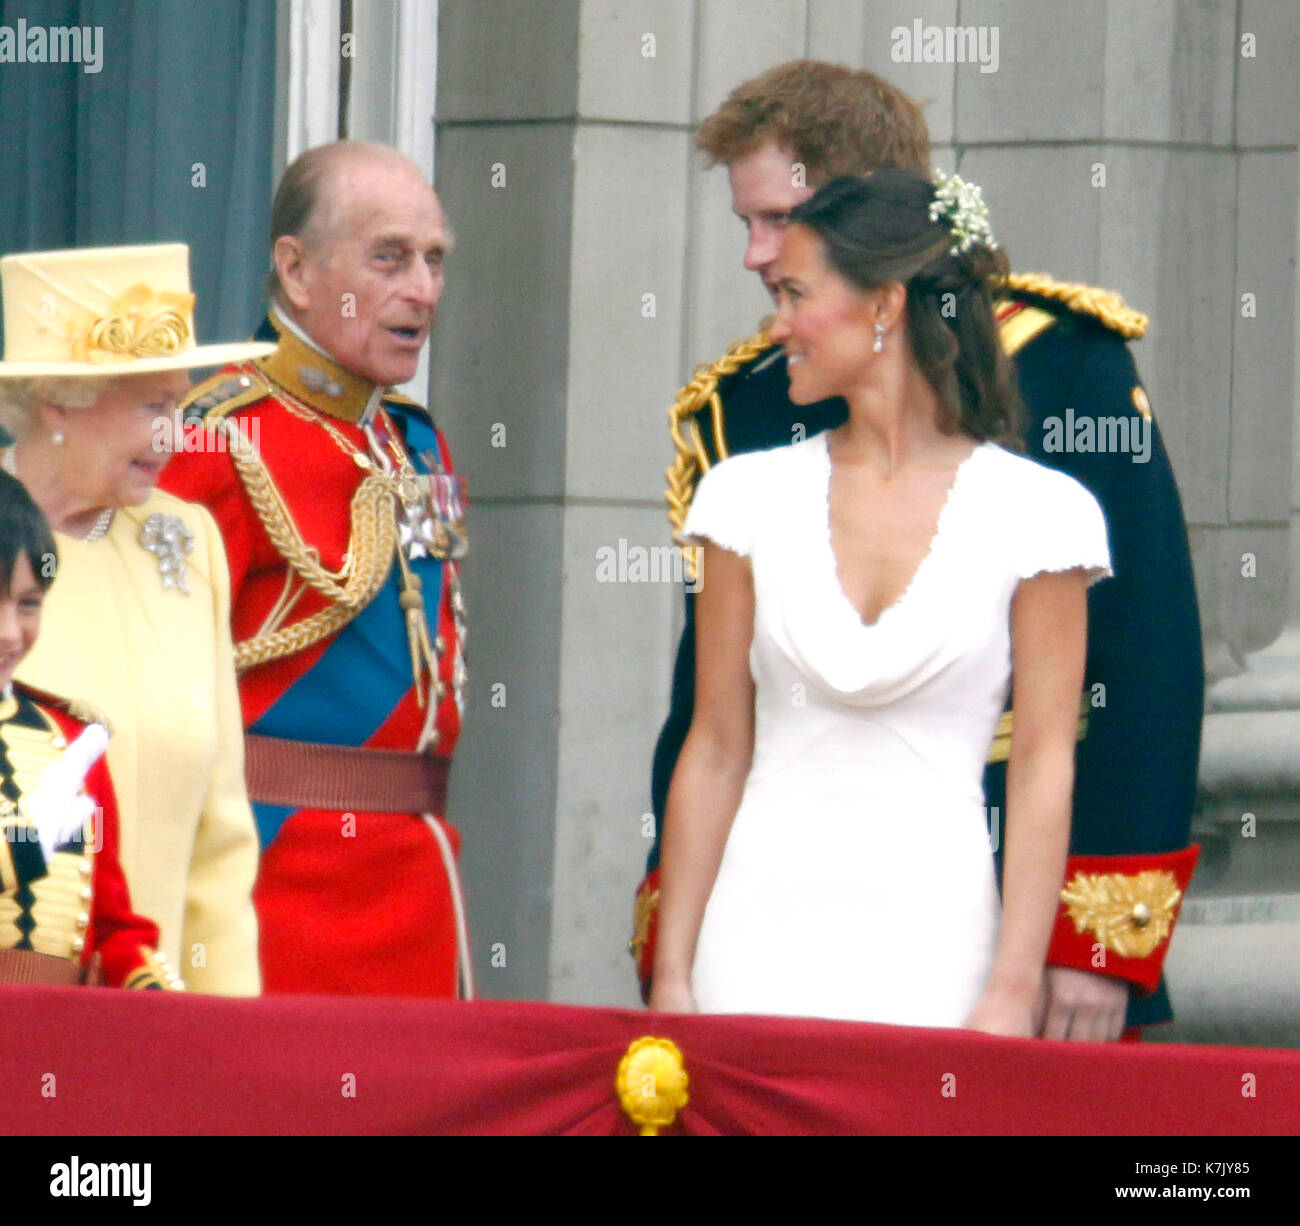 Photo Must Be Credited ©Alpha Press 074533BH 29/04/2011 Queen Elizabeth II, Prince Philip Duke of Edinburgh, Pippa Philippa Middleton and Prince Harry on the balcony during The Royal Wedding of Prince William and Kate Catherine Katherine Middleton Buckingham Palace Forecourt London Stock Photo